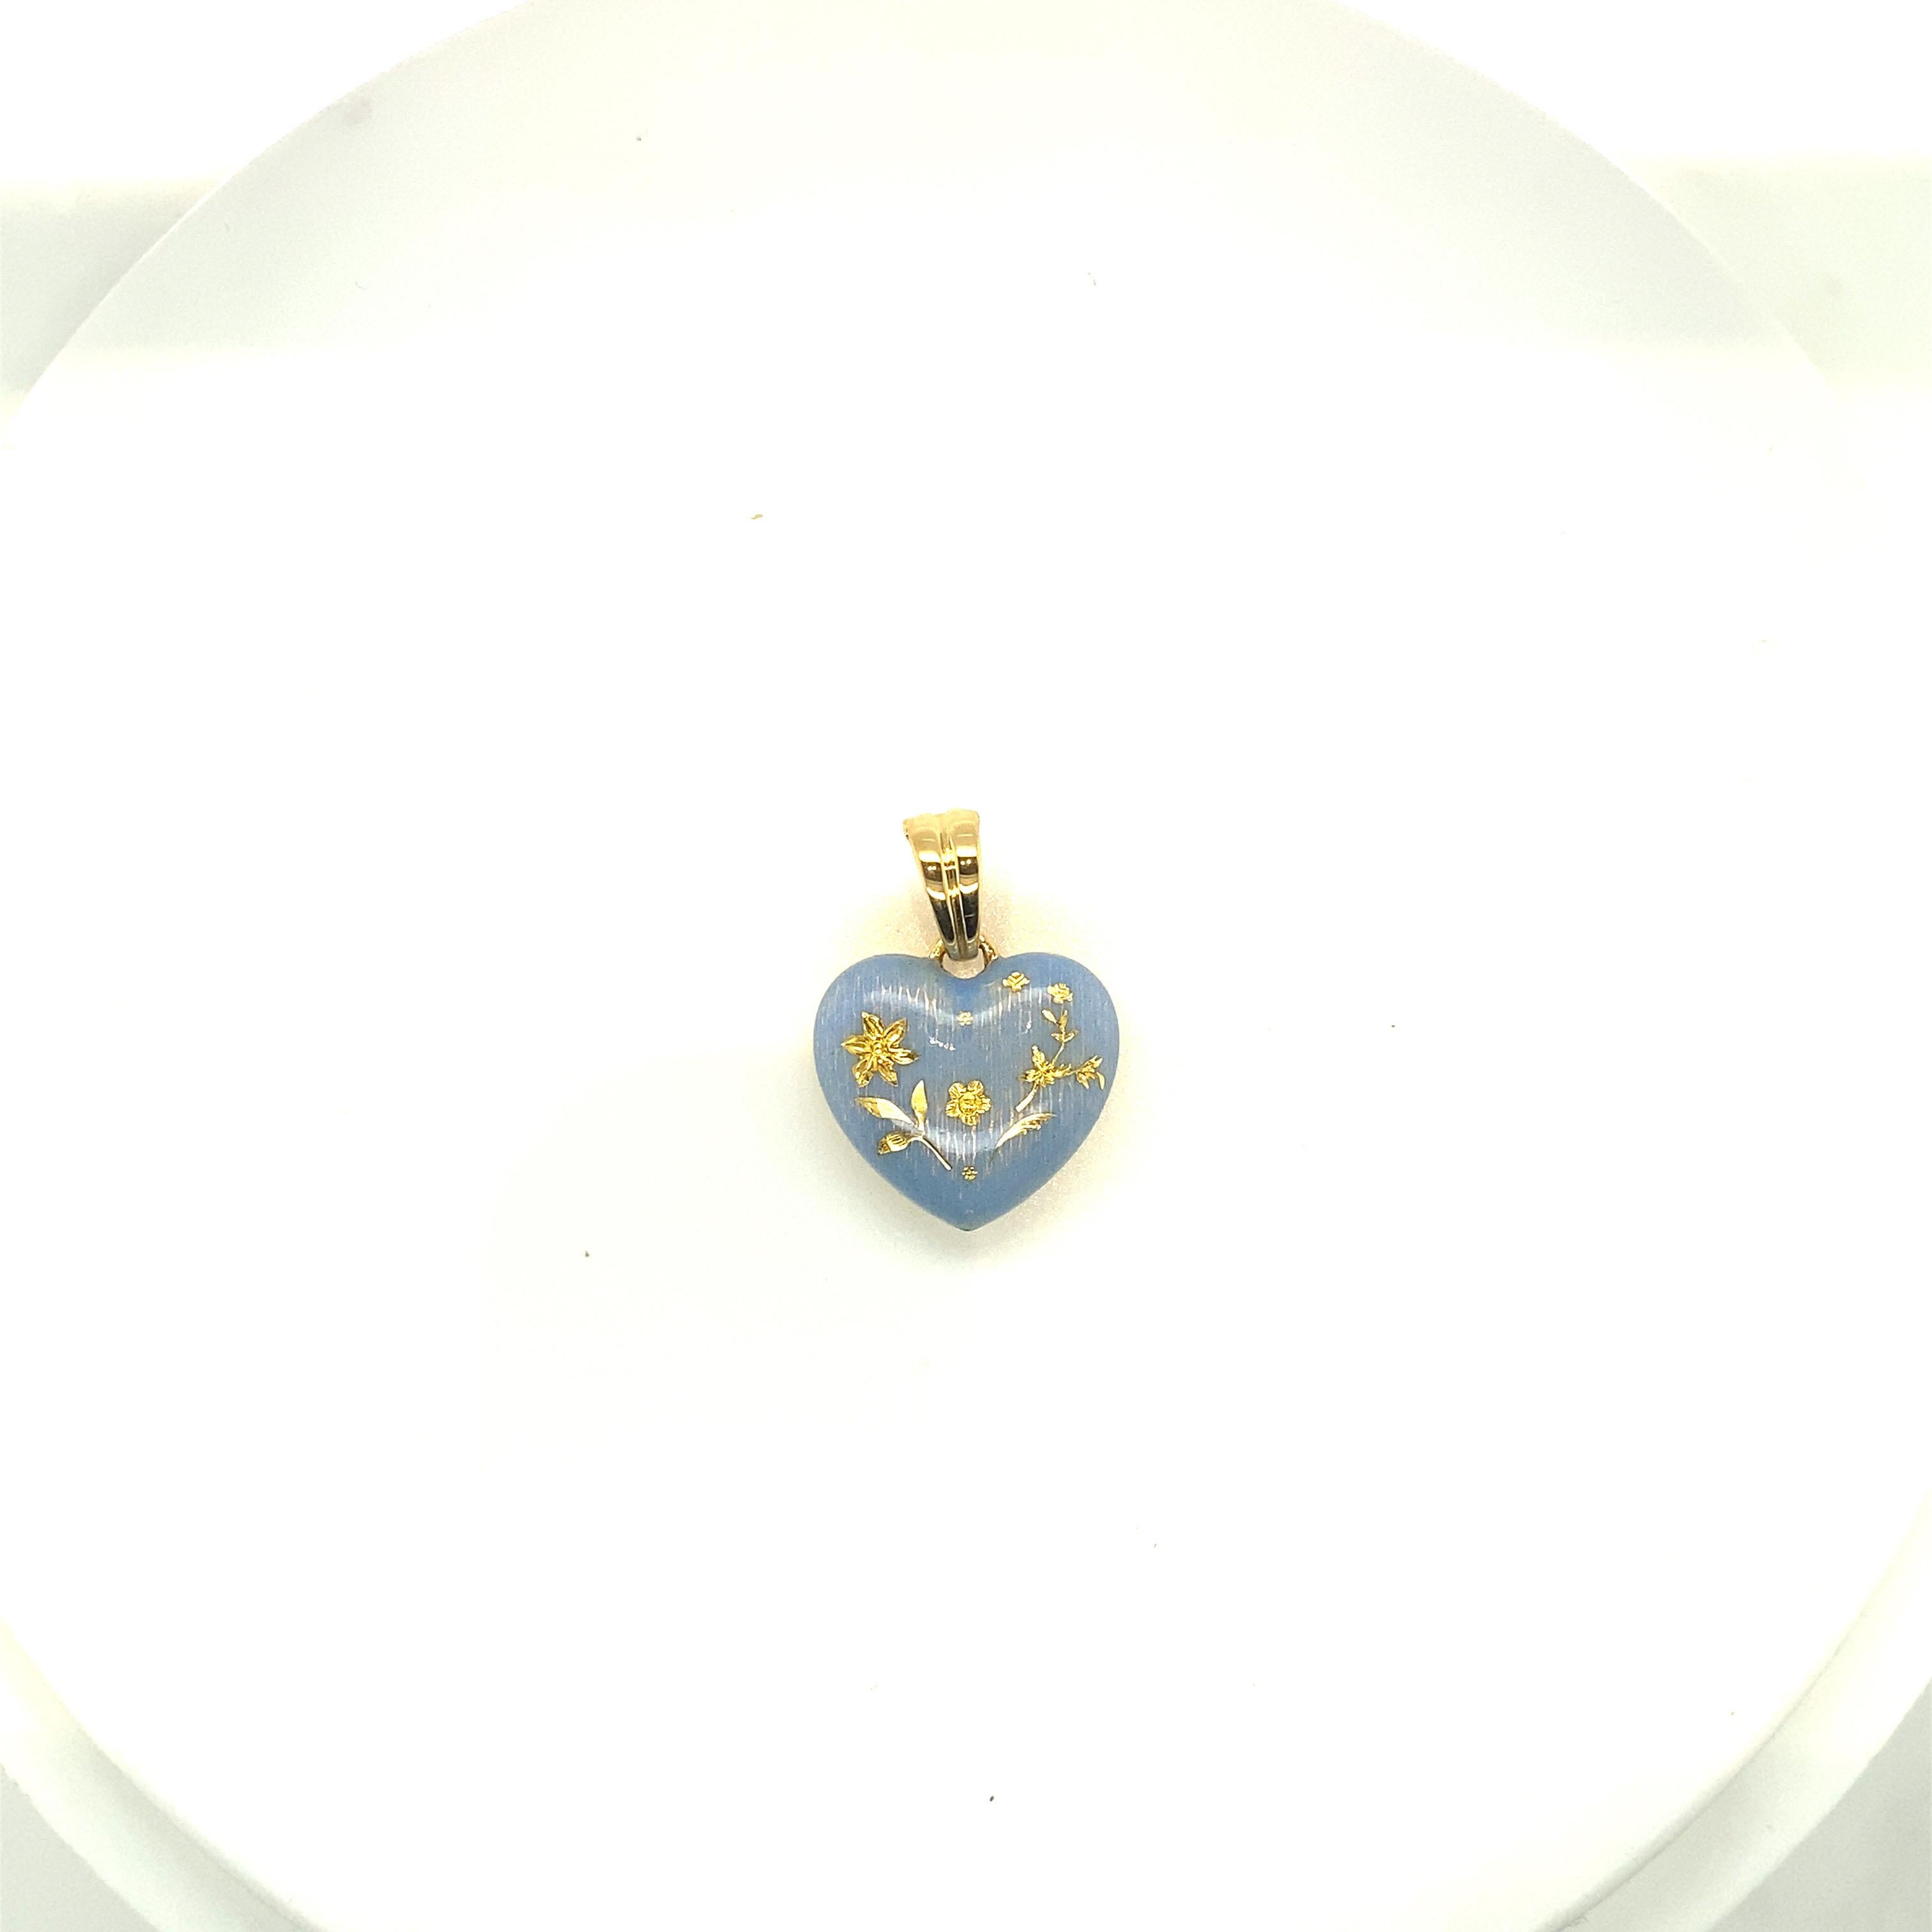 This modern 18 karat yellow gold Faberge heart pendant was made by Victor Mayer. The  perriwinkle blue enamel heart was  crafted in the same tradition of the original Imperial eggs using Faberges iconic guilloche enameling techniques. The heart